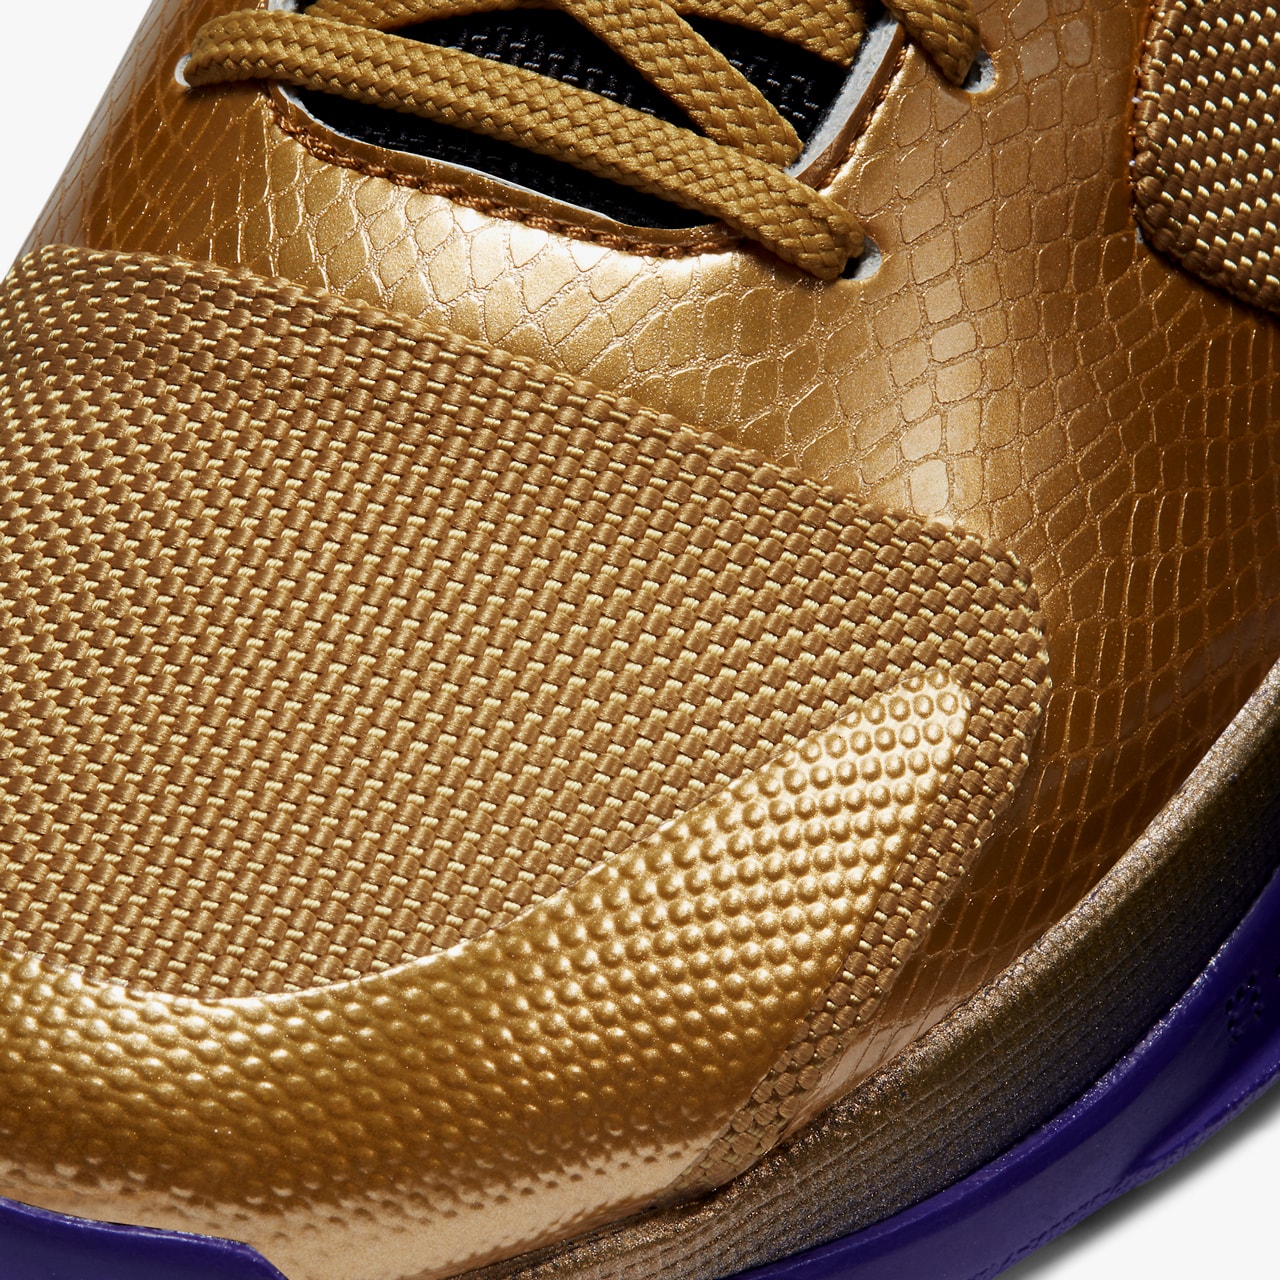 undefeated nike basketball kobe bryant 5 protro hall of fame metallic gold field purple multi color red DA6809 700 official release date info photos price store list buying guide